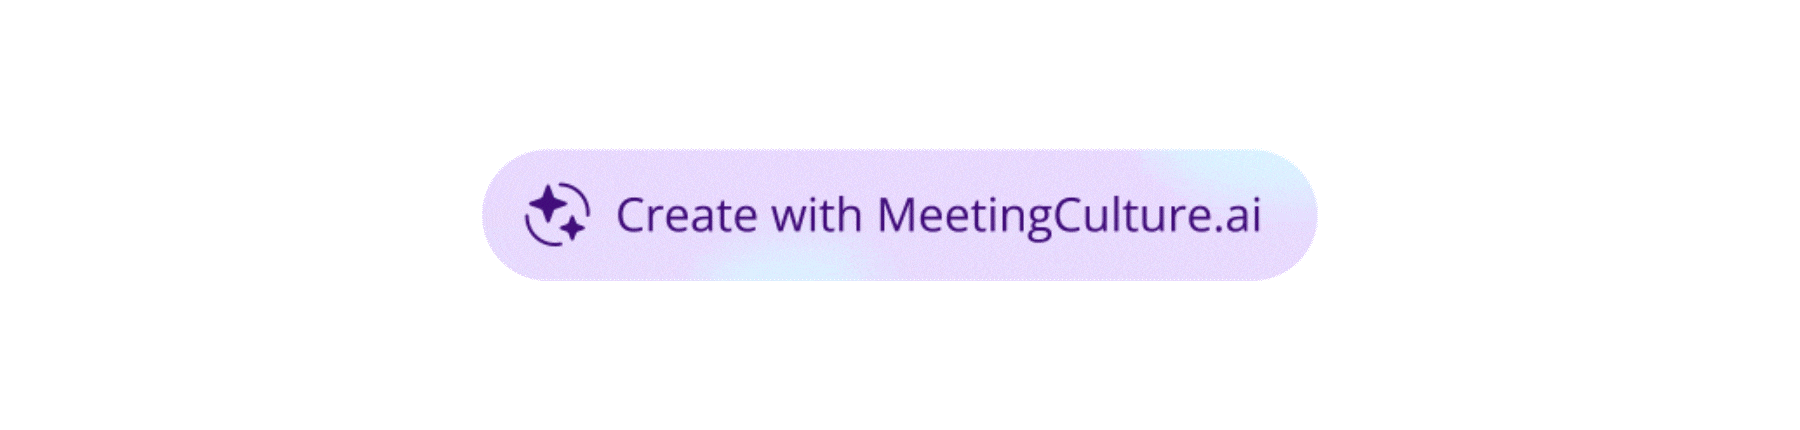 Meetingculture Button White Looping Optimized